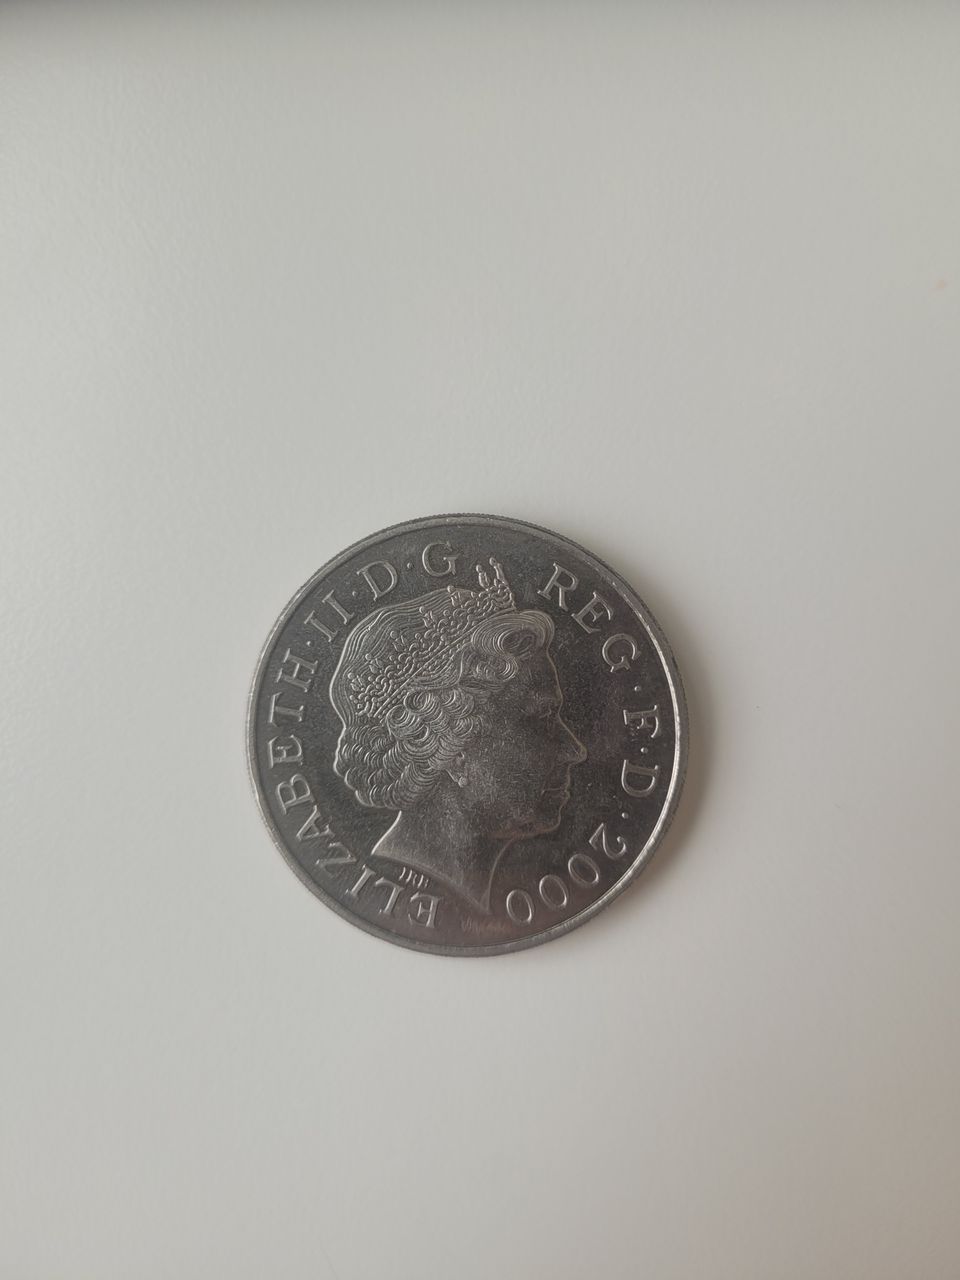 2000 £5 Five Pound coin - Queen Mother